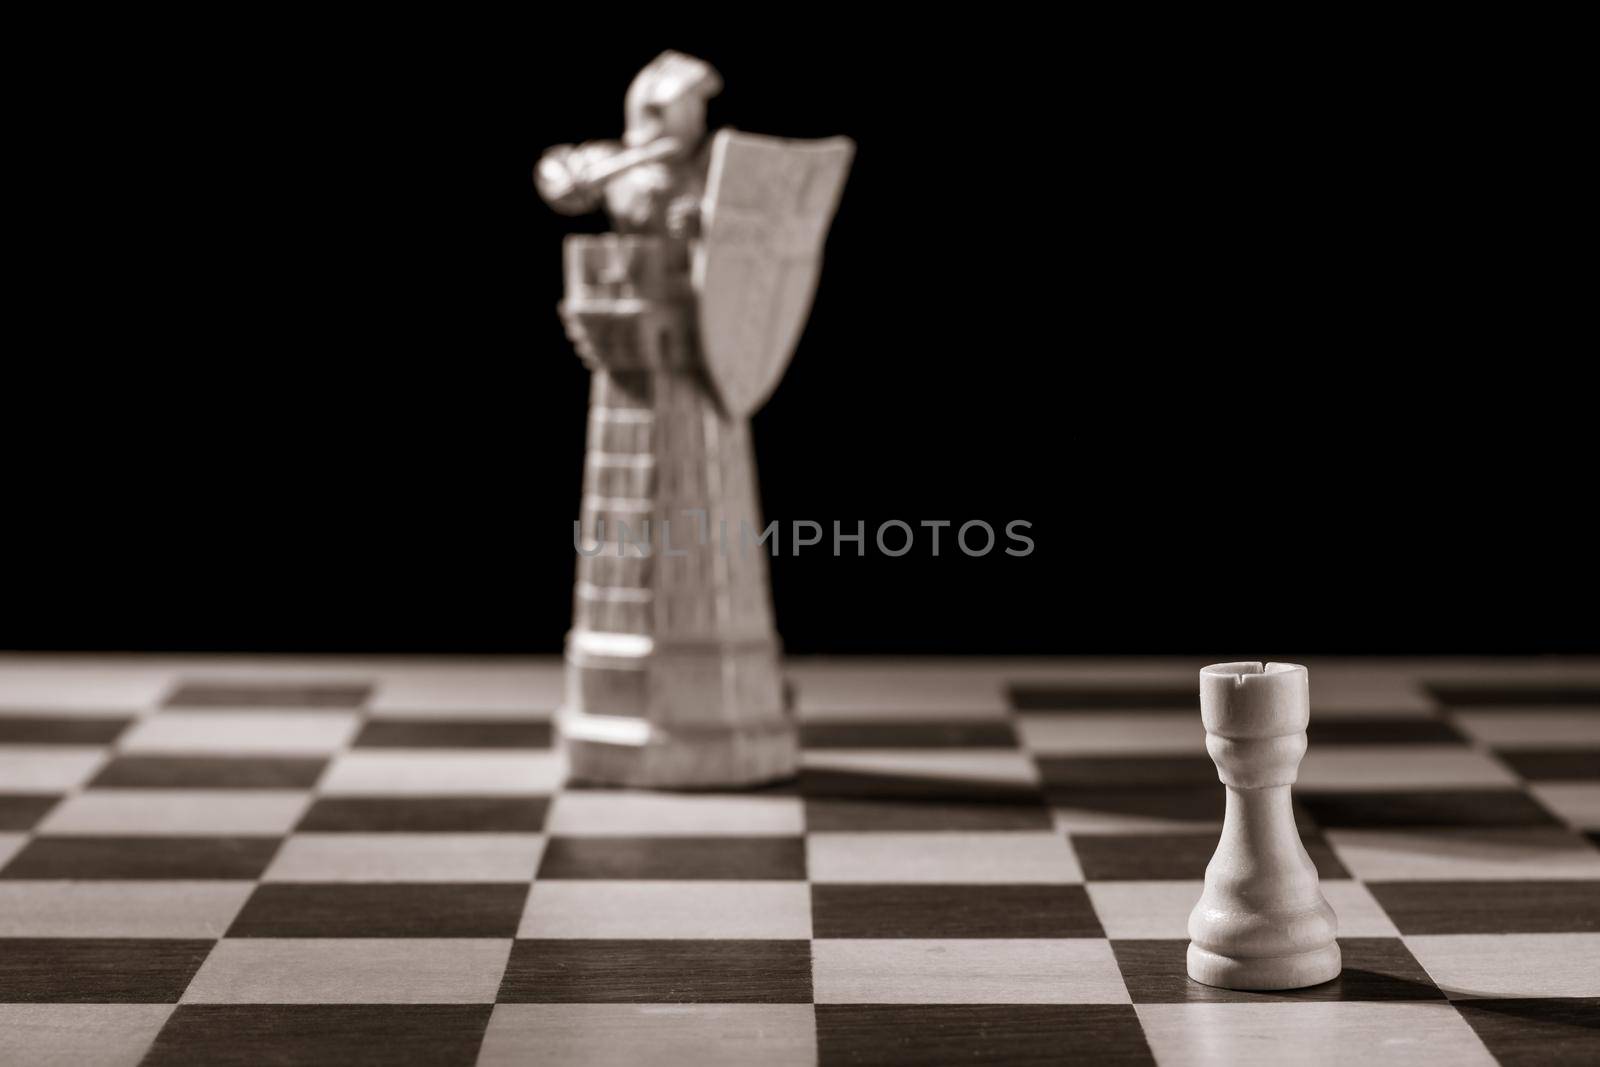 Classic white rook and the same chess piece in the form of medieval figure on the background. Selective focus on classic piece